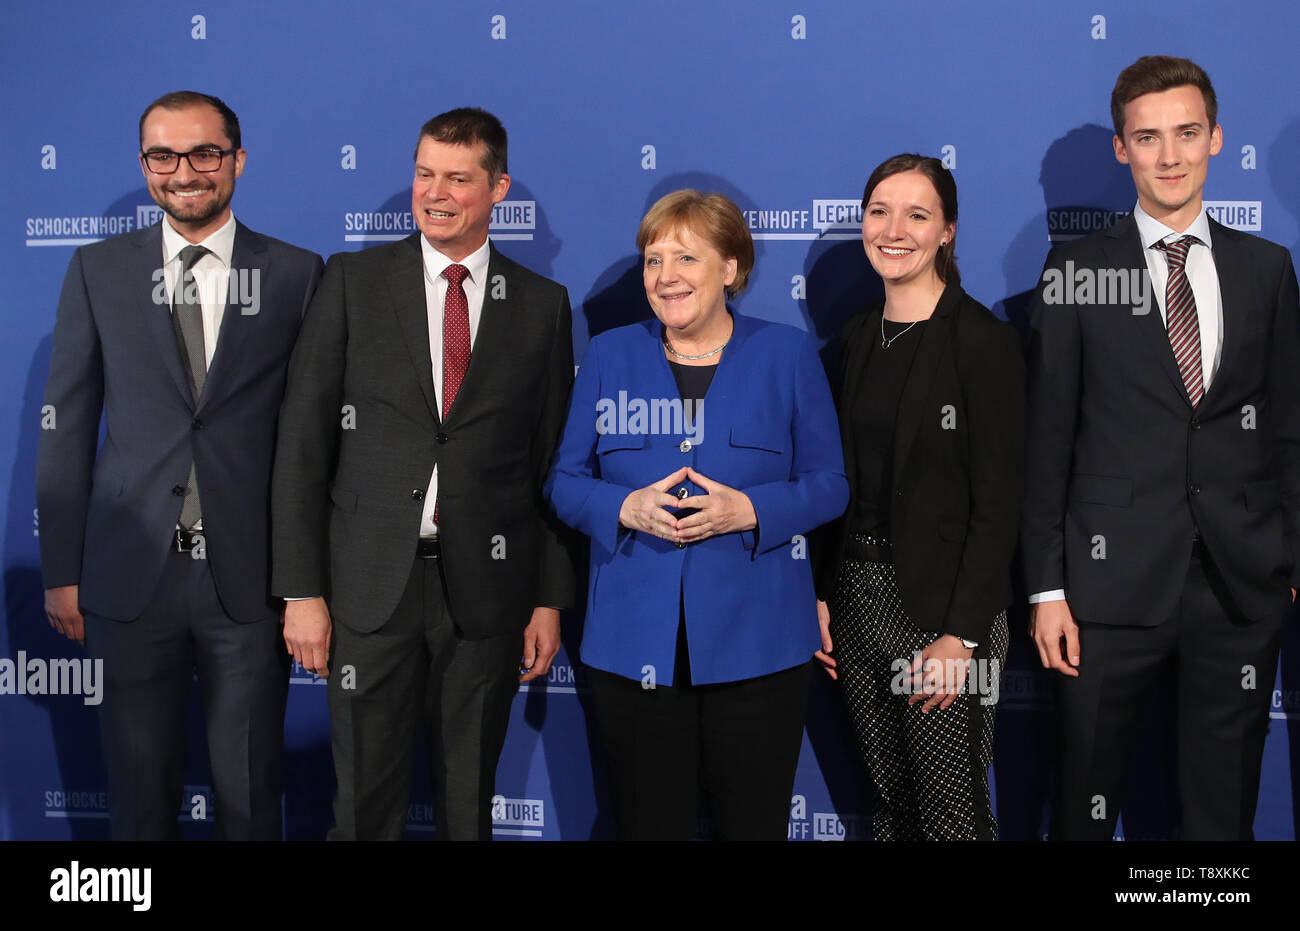 Ravensburg, Germany. 15th May, 2019. Chancellor Angela Merkel (CDU) is about to premiere the Dr. Andreas Schockenhoff Lecture together with Axel Müller (CDU 2nd from left) and the children of Andreas Schockenhoff, Ferdinand (l), Theresa (4th from left) and Philipp (r) for a photo. In order to keep alive the memory of the legacy of the late member of the Bundestag Andreas Schockenhoff, his successor in the constituency of Ravensburg, Axel Müller, initiated the lecture series. Credit: Karl-Josef Hildenbrand/dpa/Alamy Live News Stock Photo